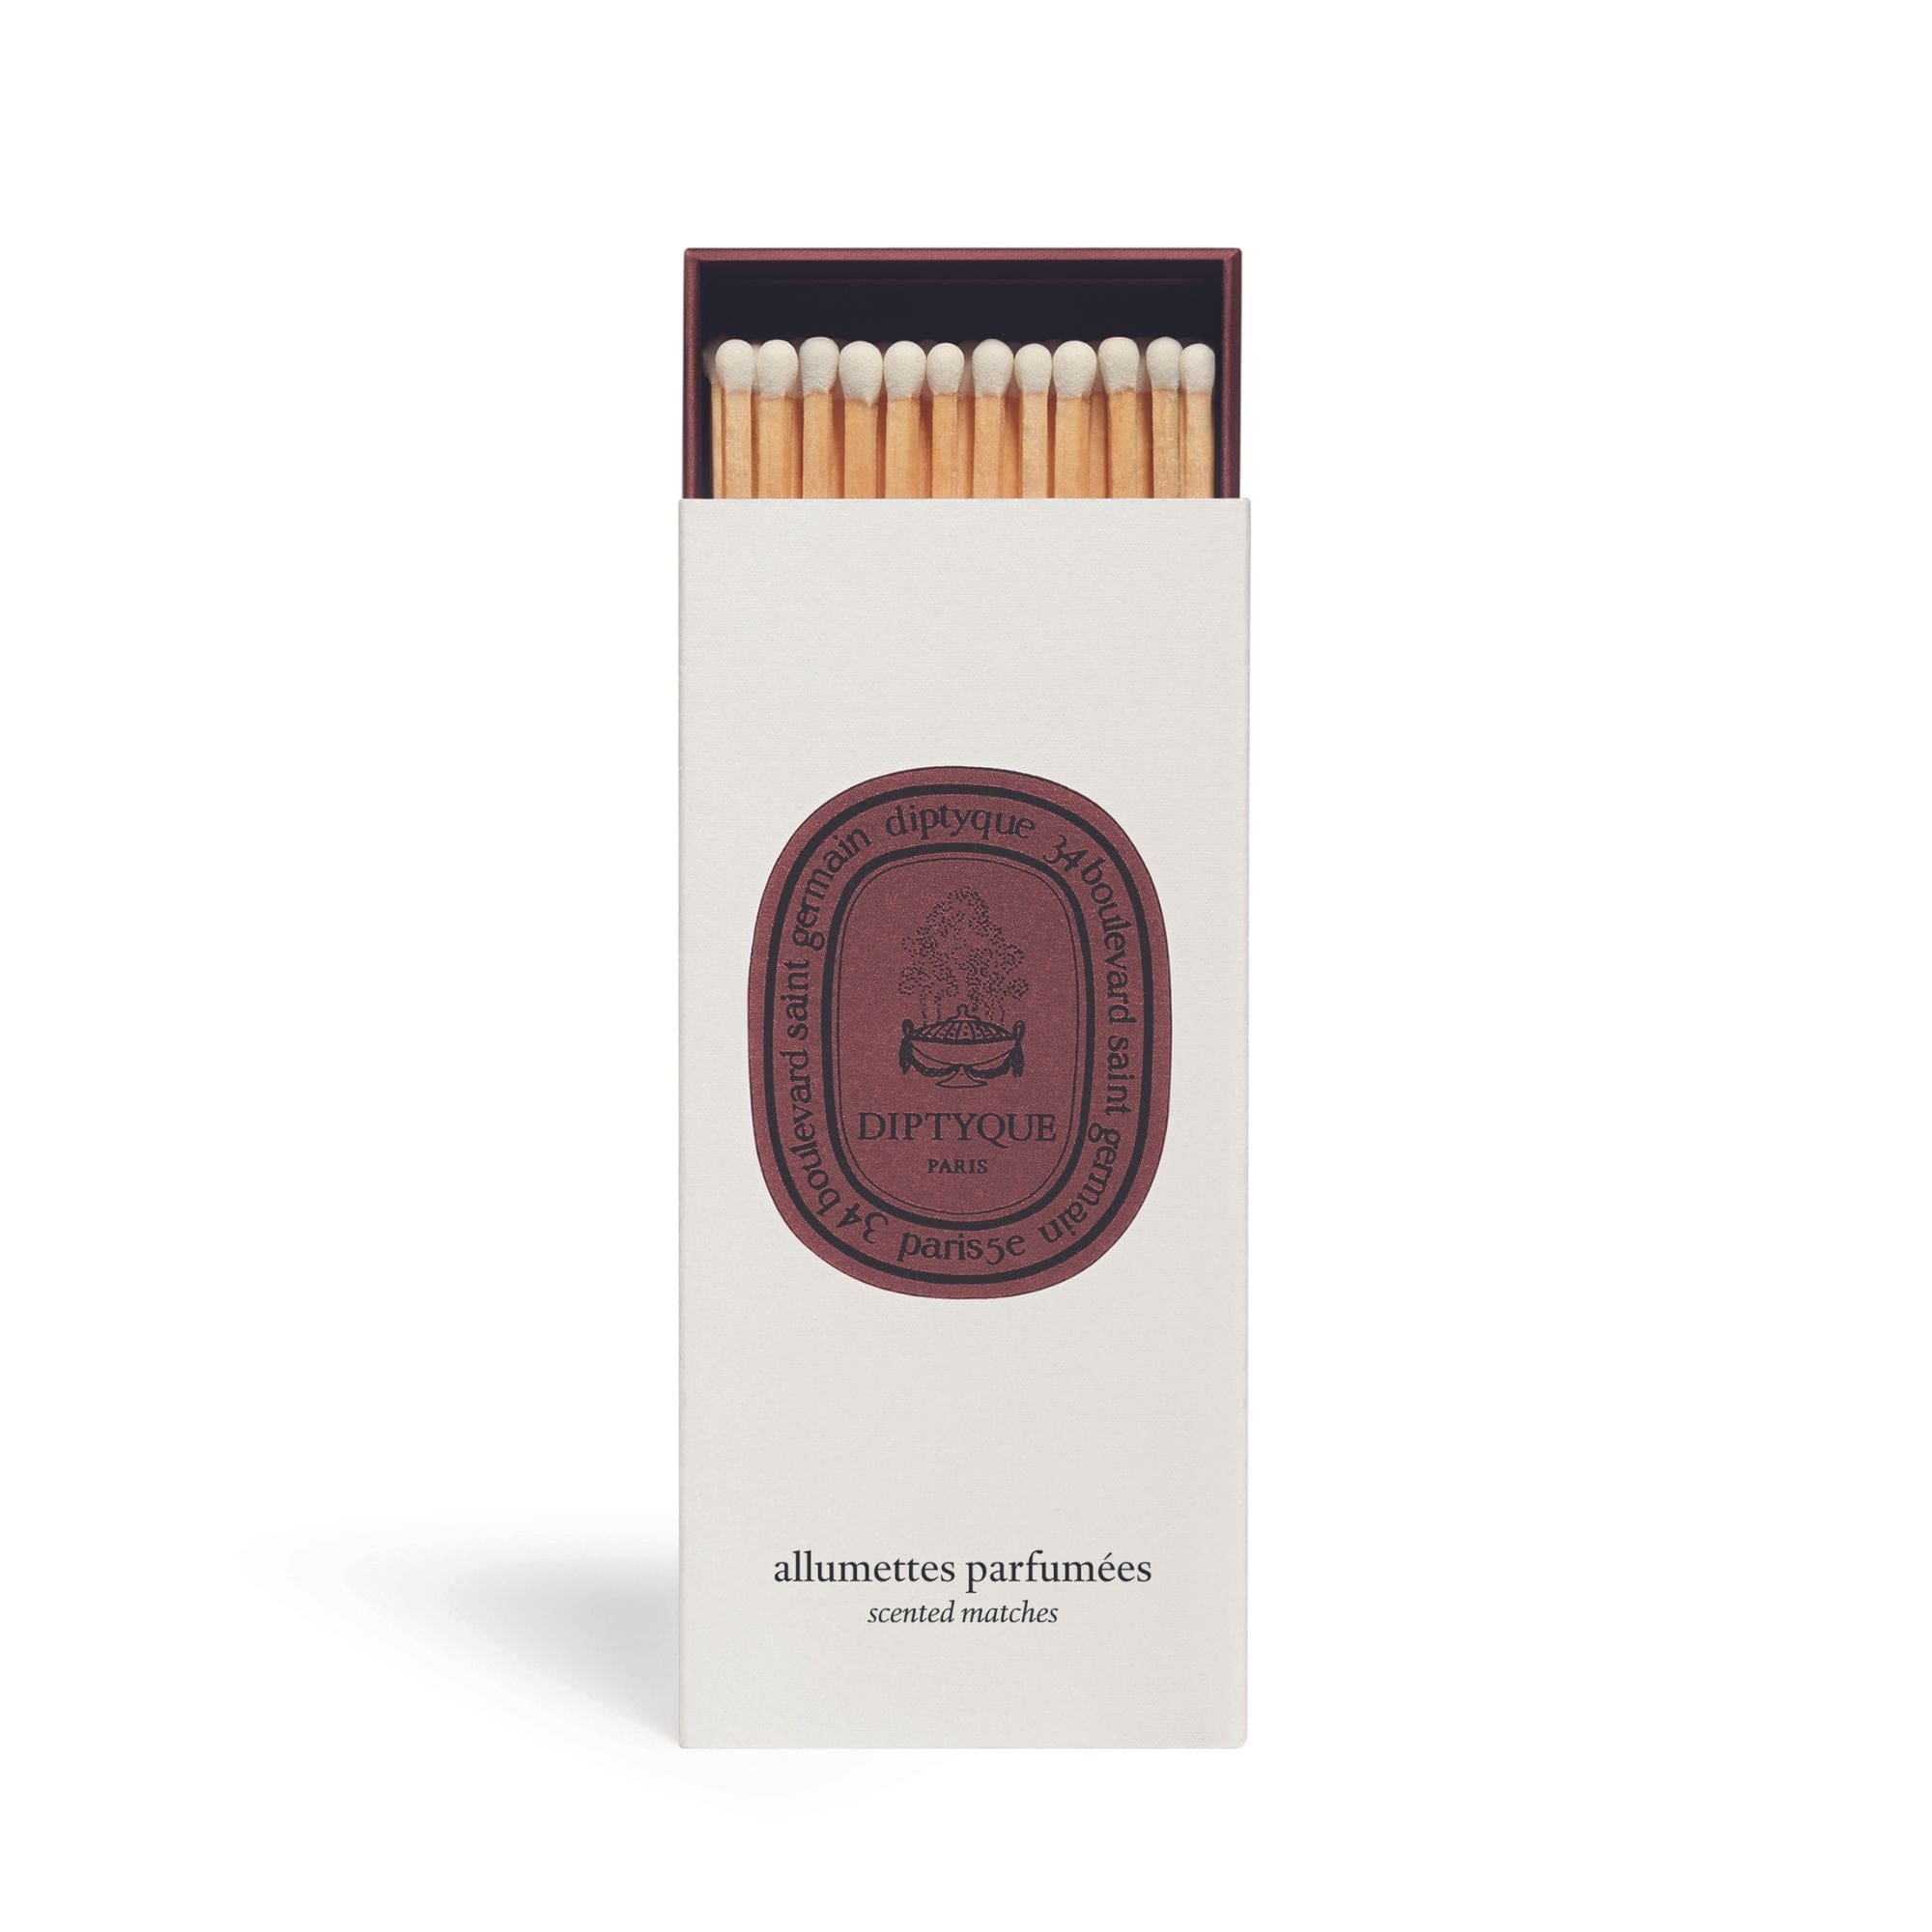 Scented Matches La Forêt Rêve Diptyque Scented Matches